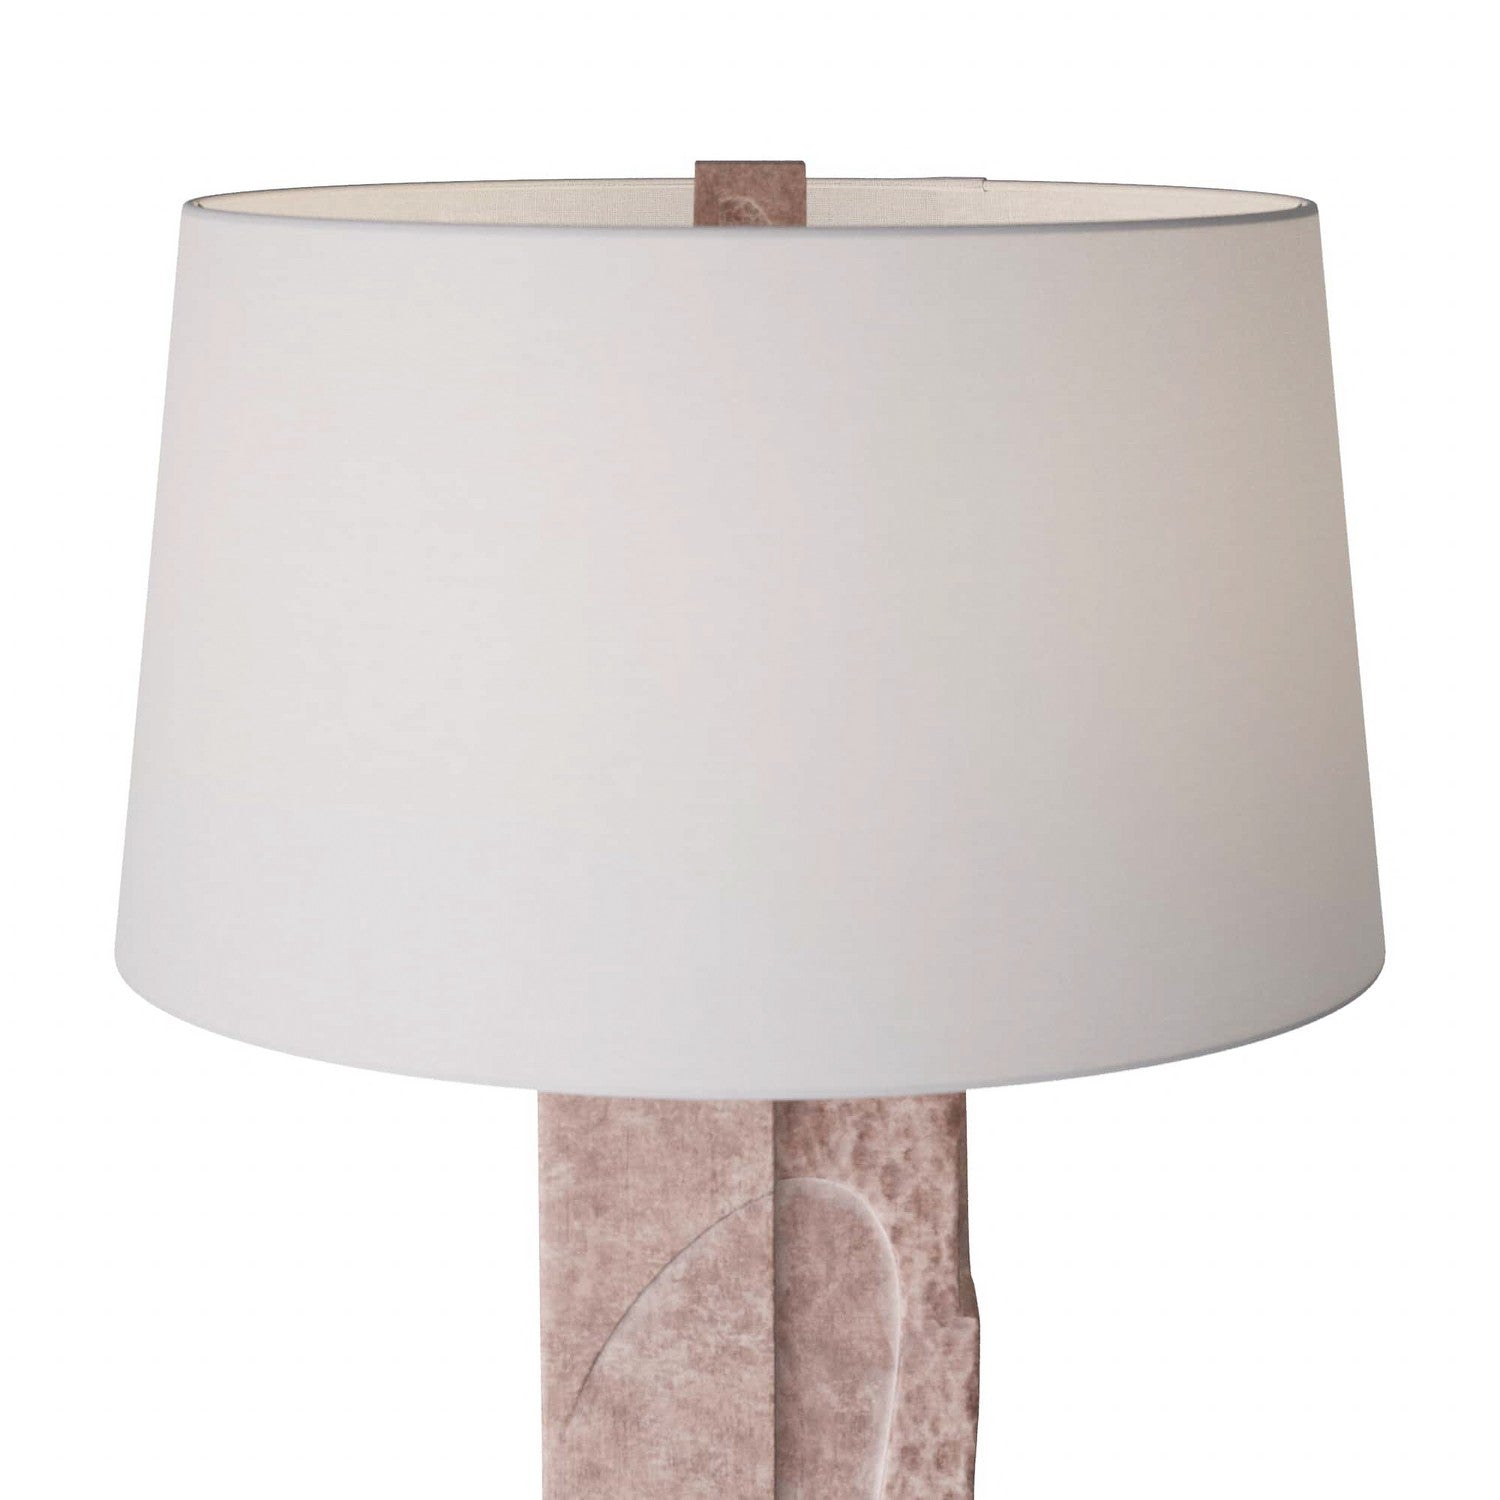 One Light Table Lamp from the Veda collection in Acorn finish